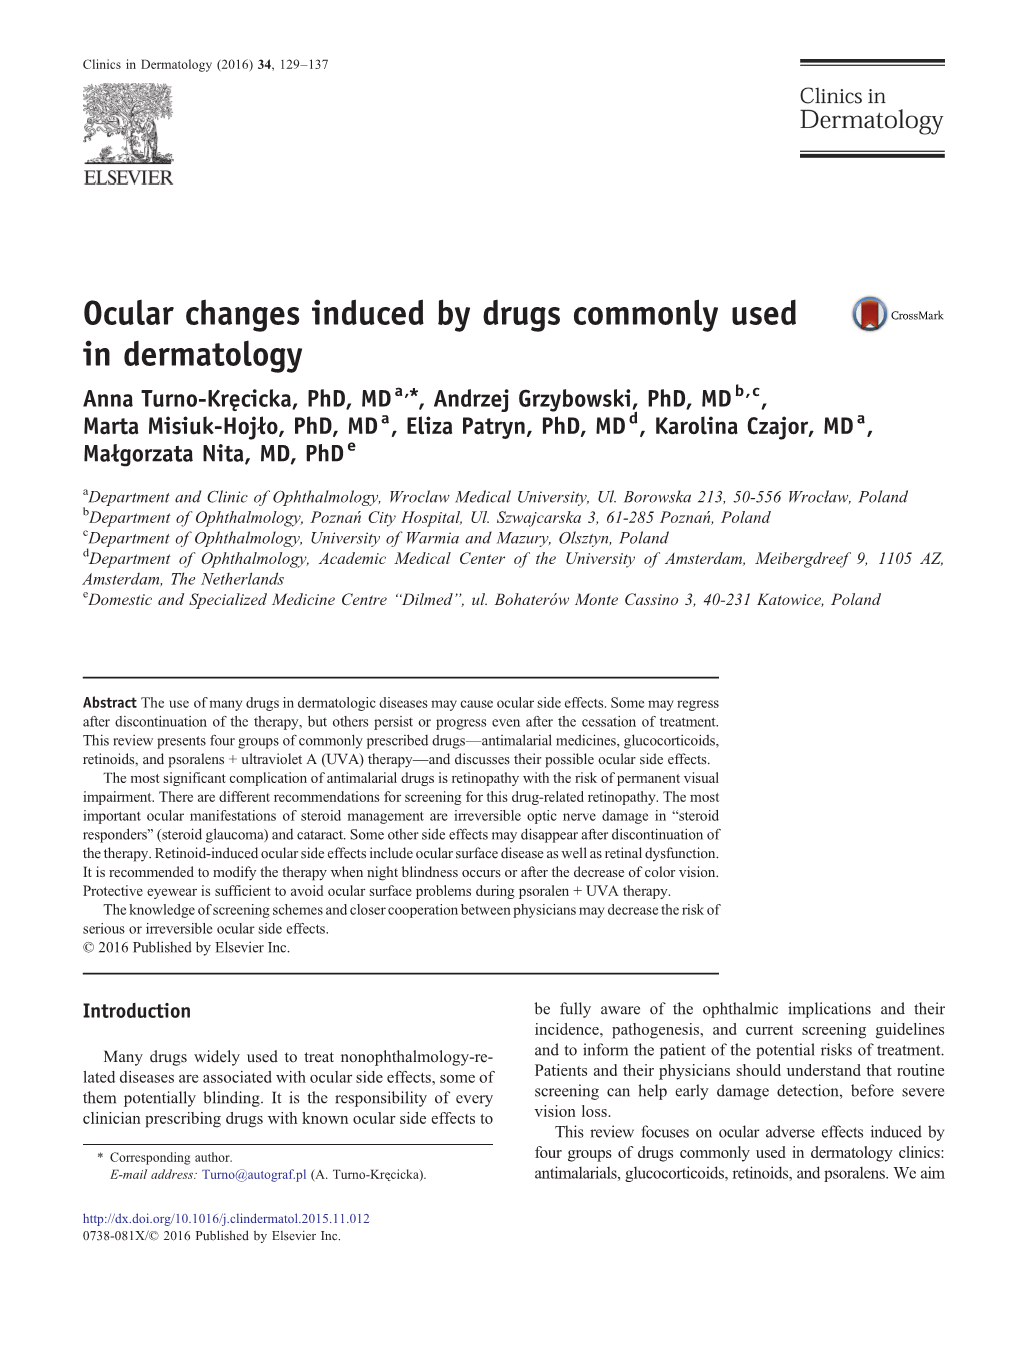 Ocular Changes Induced by Drugs Commonly Used in Dermatology